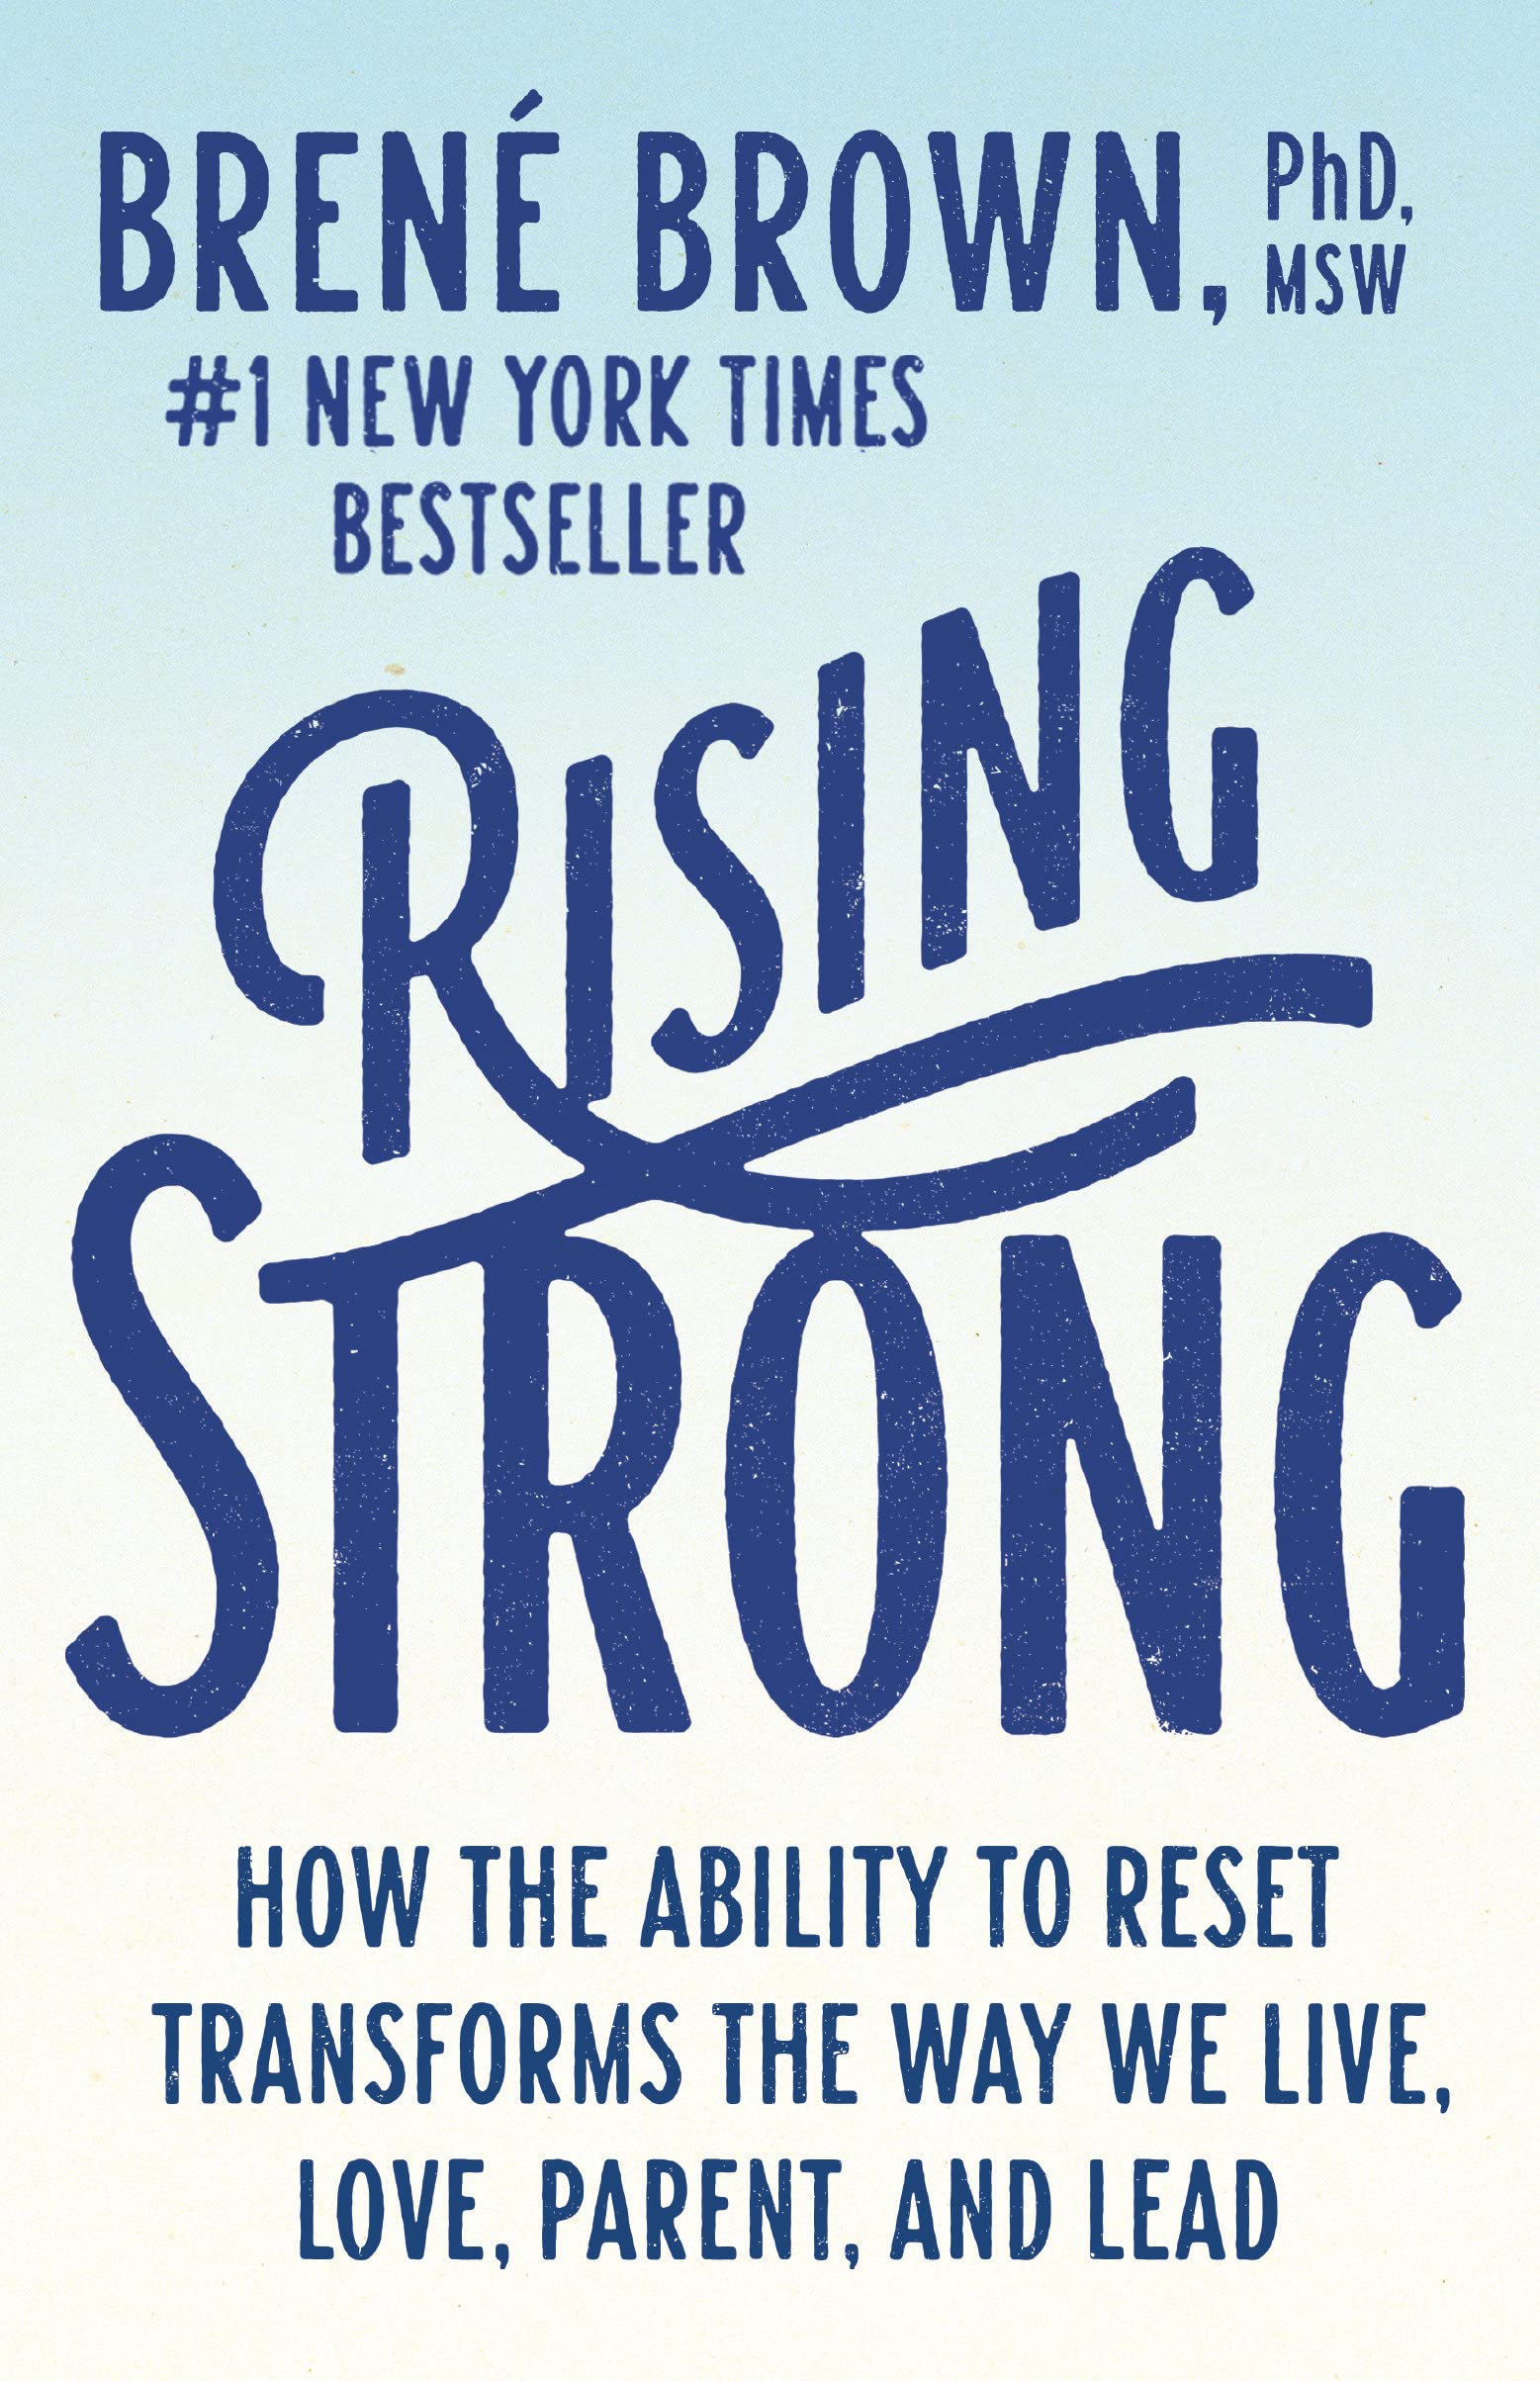 Rising Strong: How the Ability to Reset Transforms the Way We Live, Love, Parent, and Lead Paperback by Brené Brown